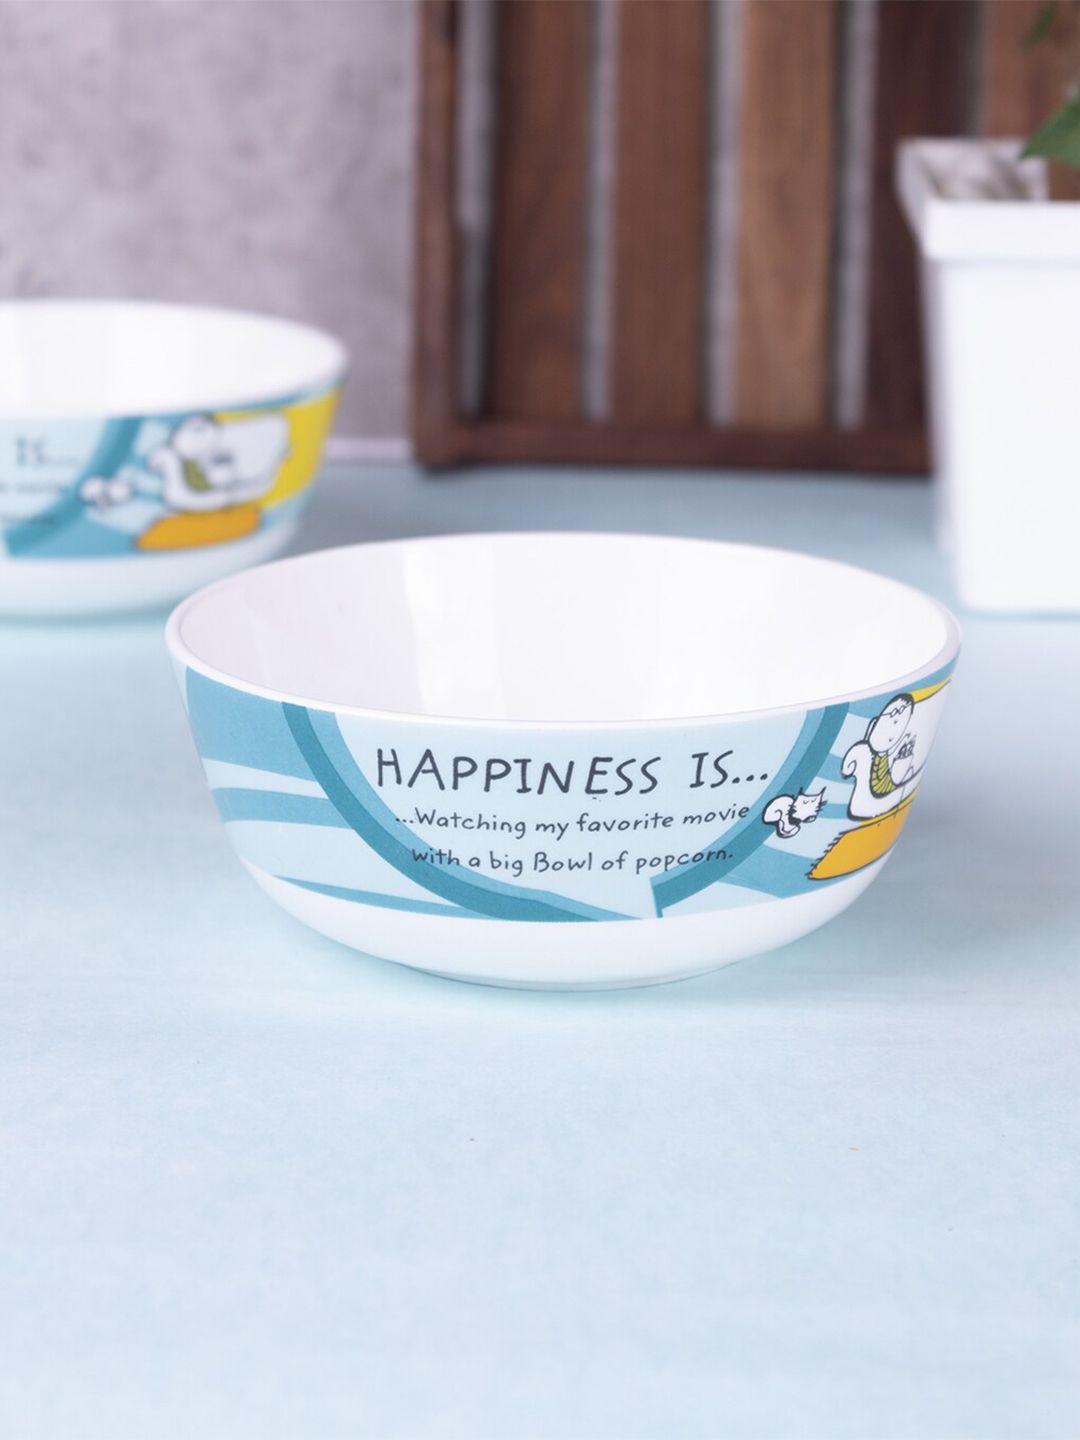 MARKET99 Turquoise Blue & White Set of 4 Printed Ceramic Glossy Bowls Price in India